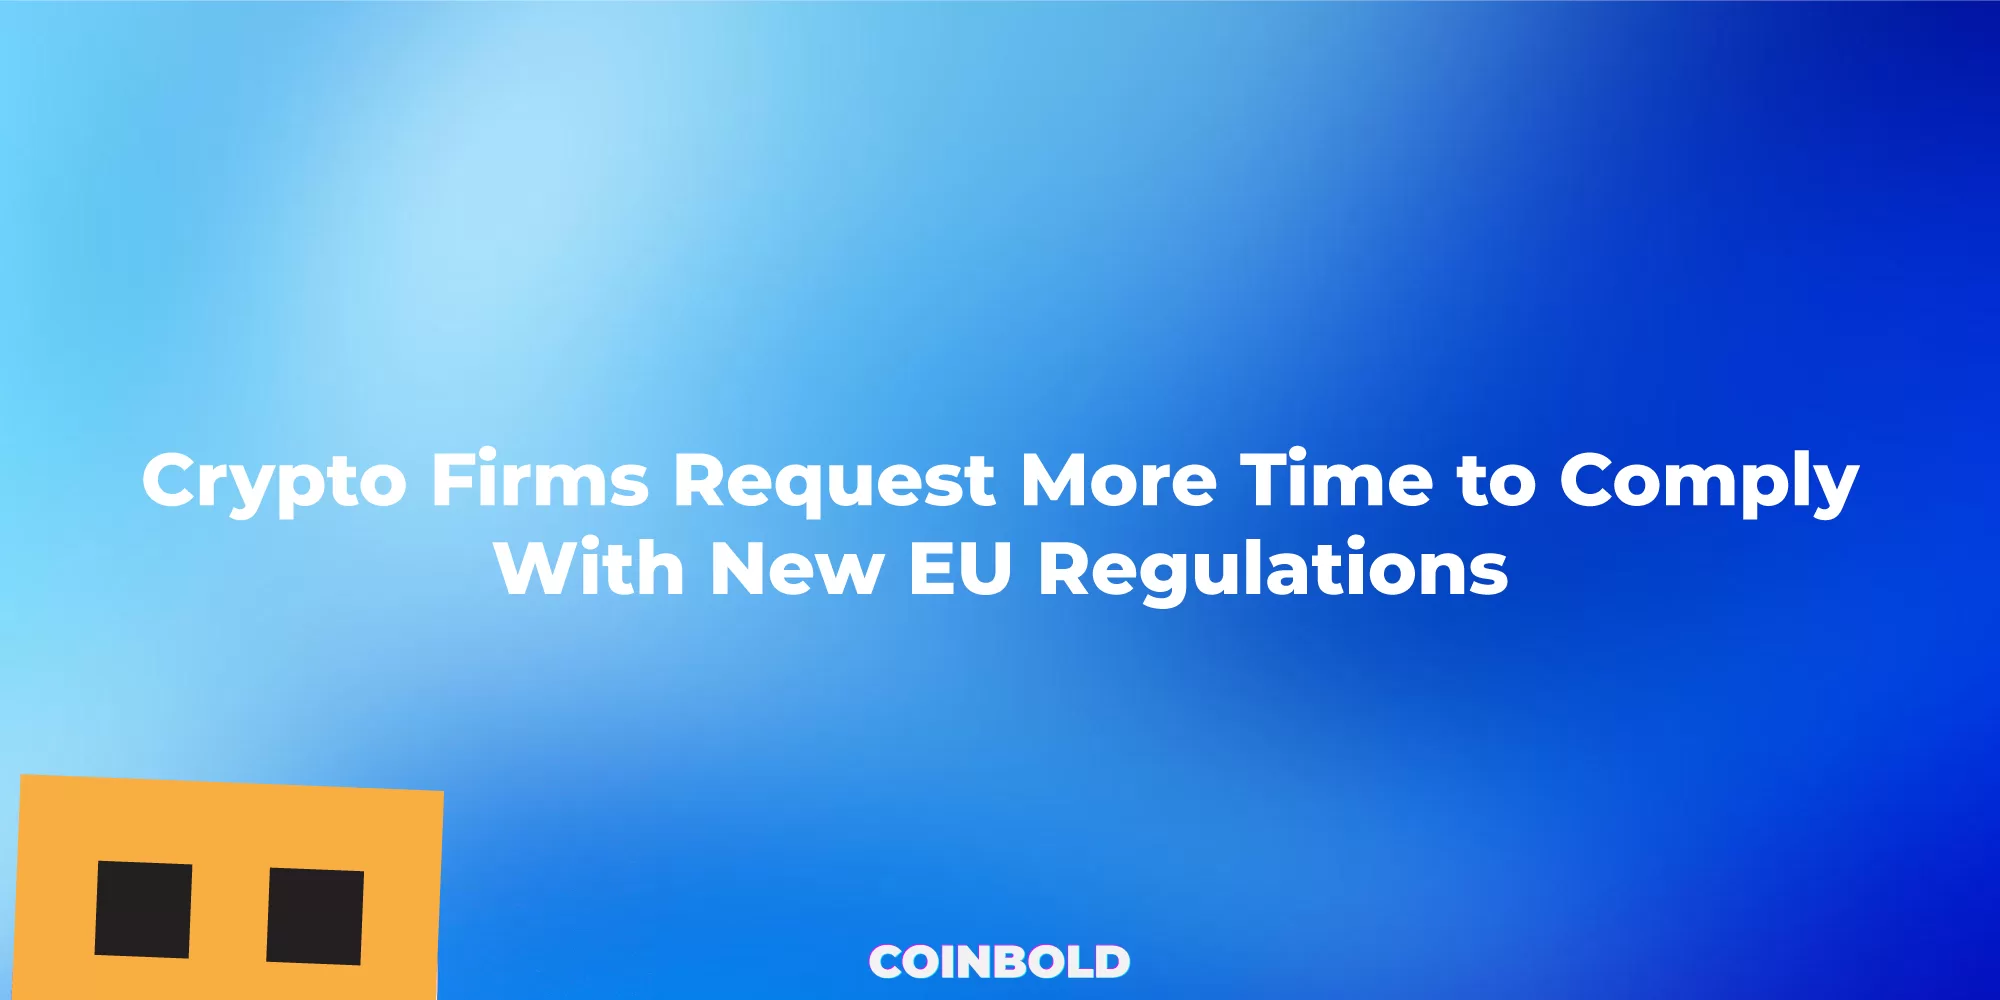 Crypto Firms Request More Time to Comply With New EU Regulations